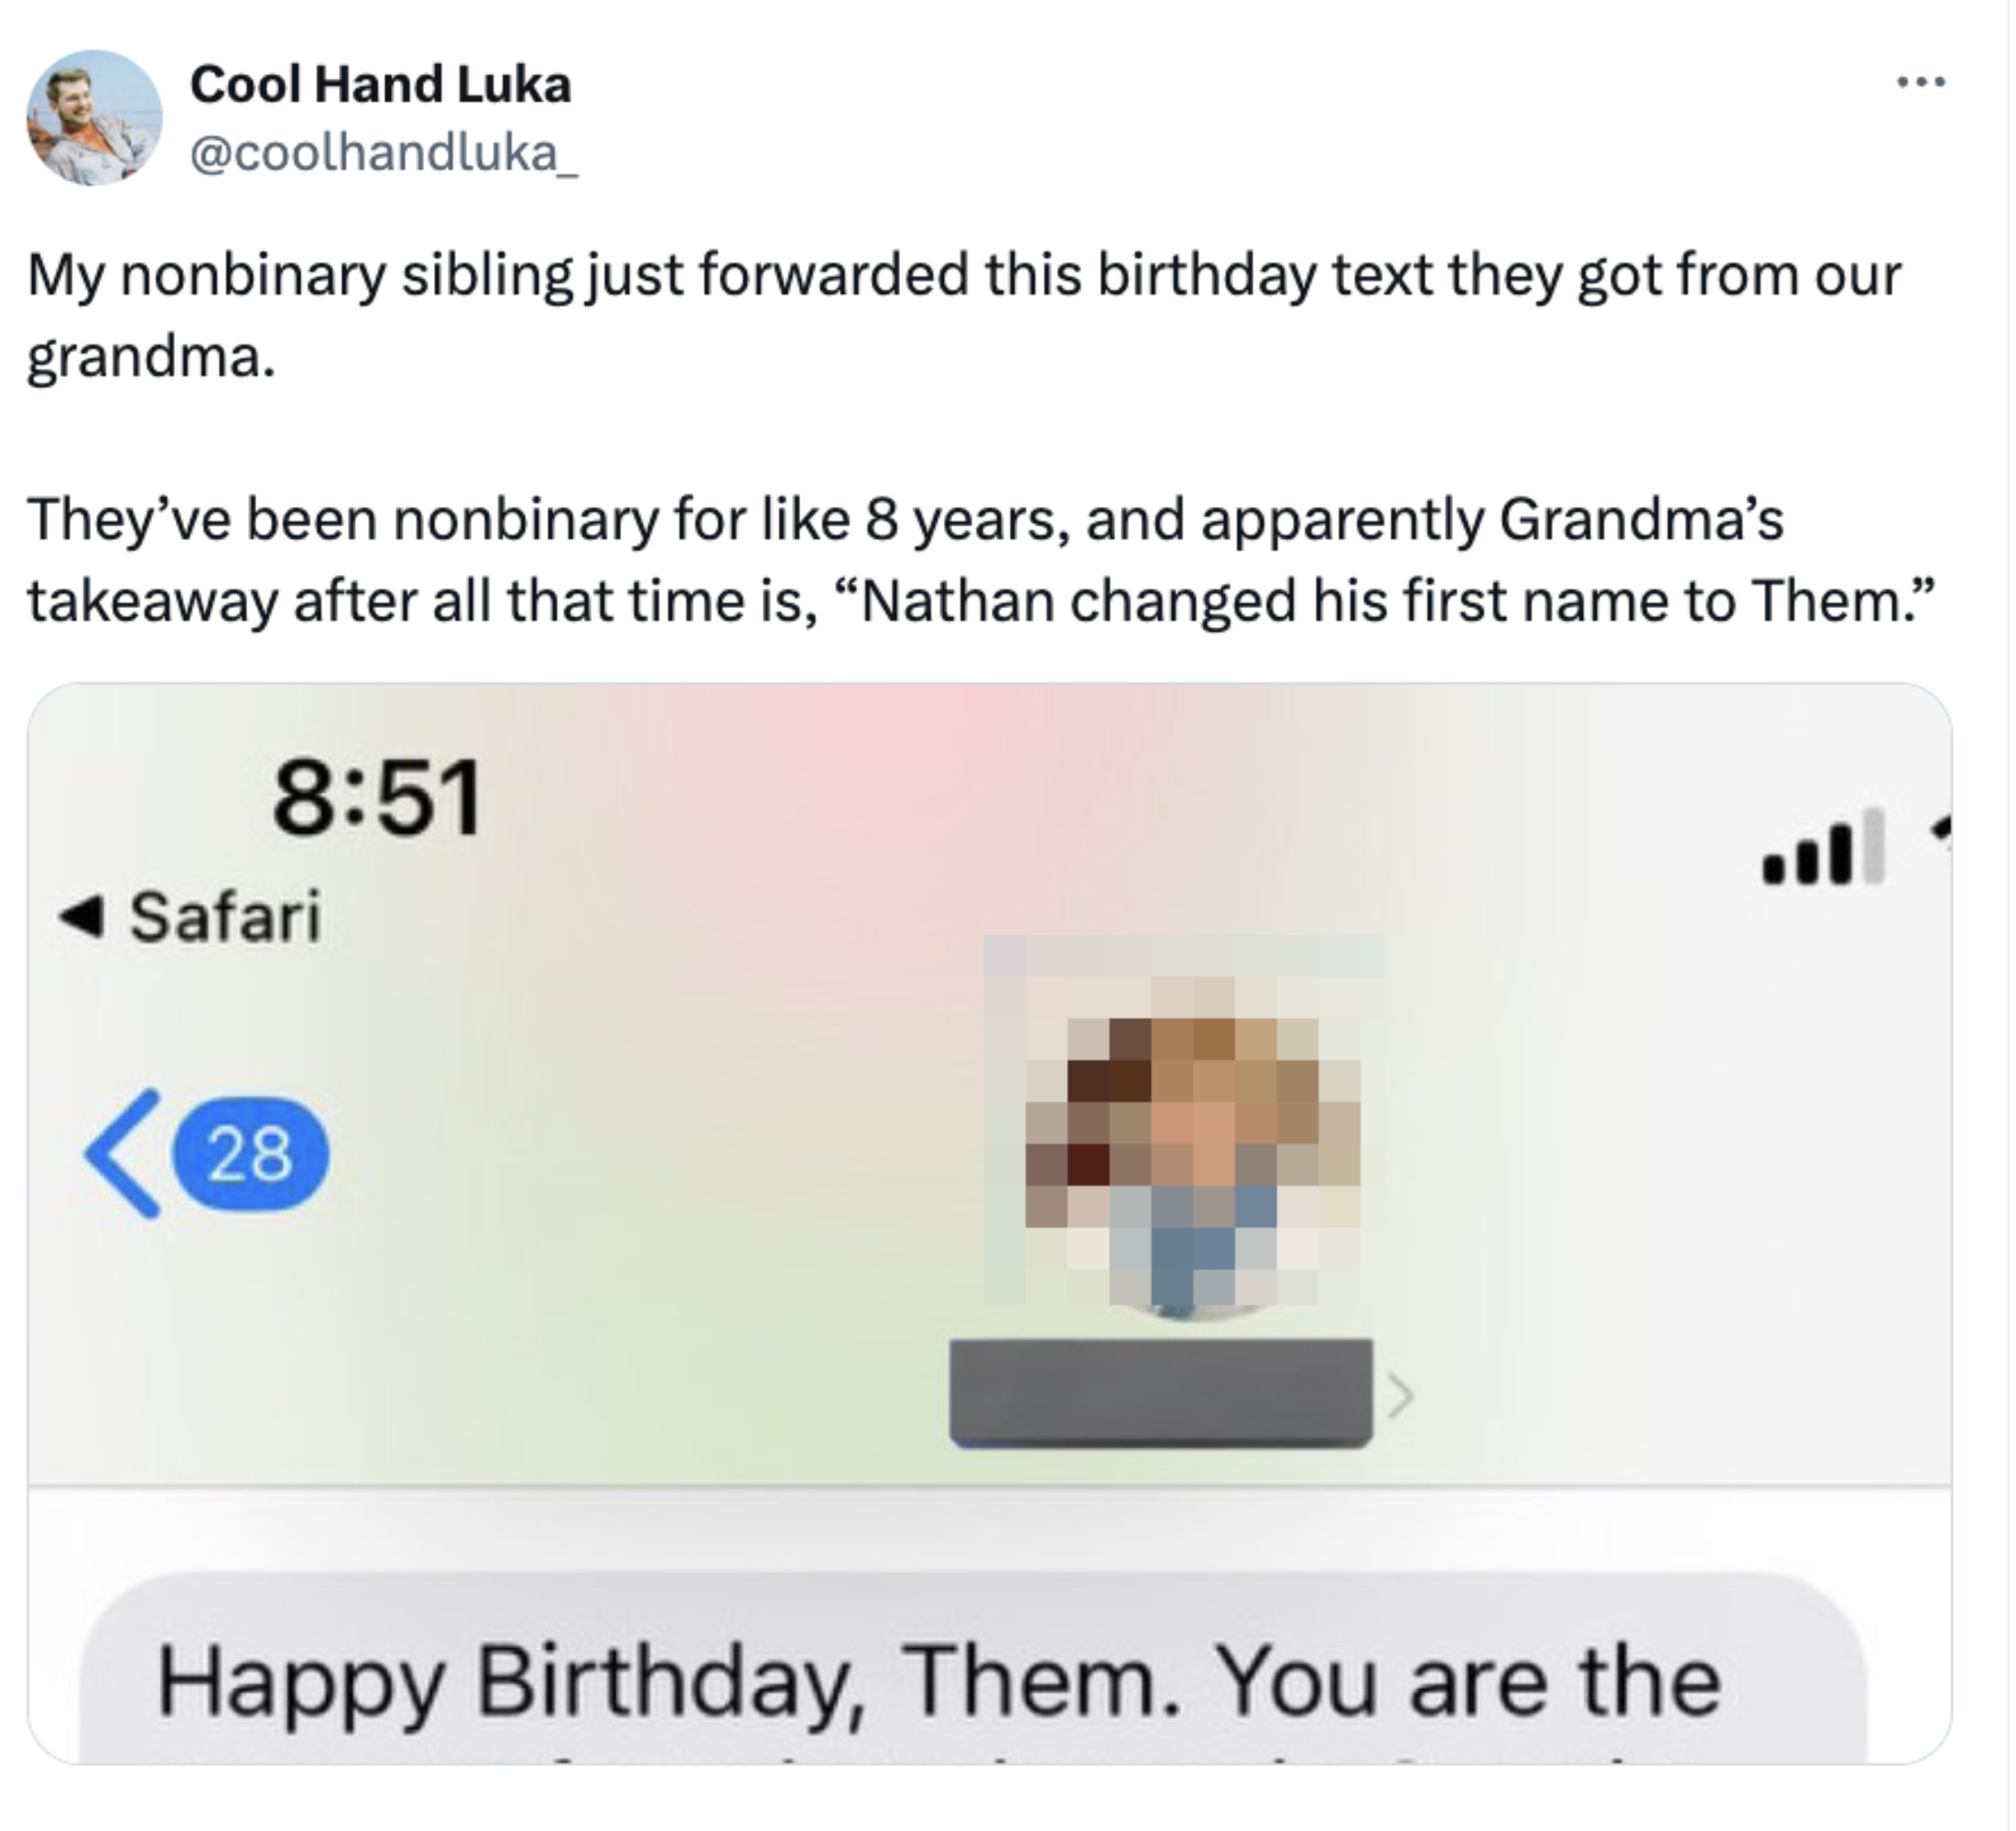 Tweet contains a humorous birthday text from grandma misunderstanding nonbinary pronouns, thinking &quot;Them&quot; is a first name